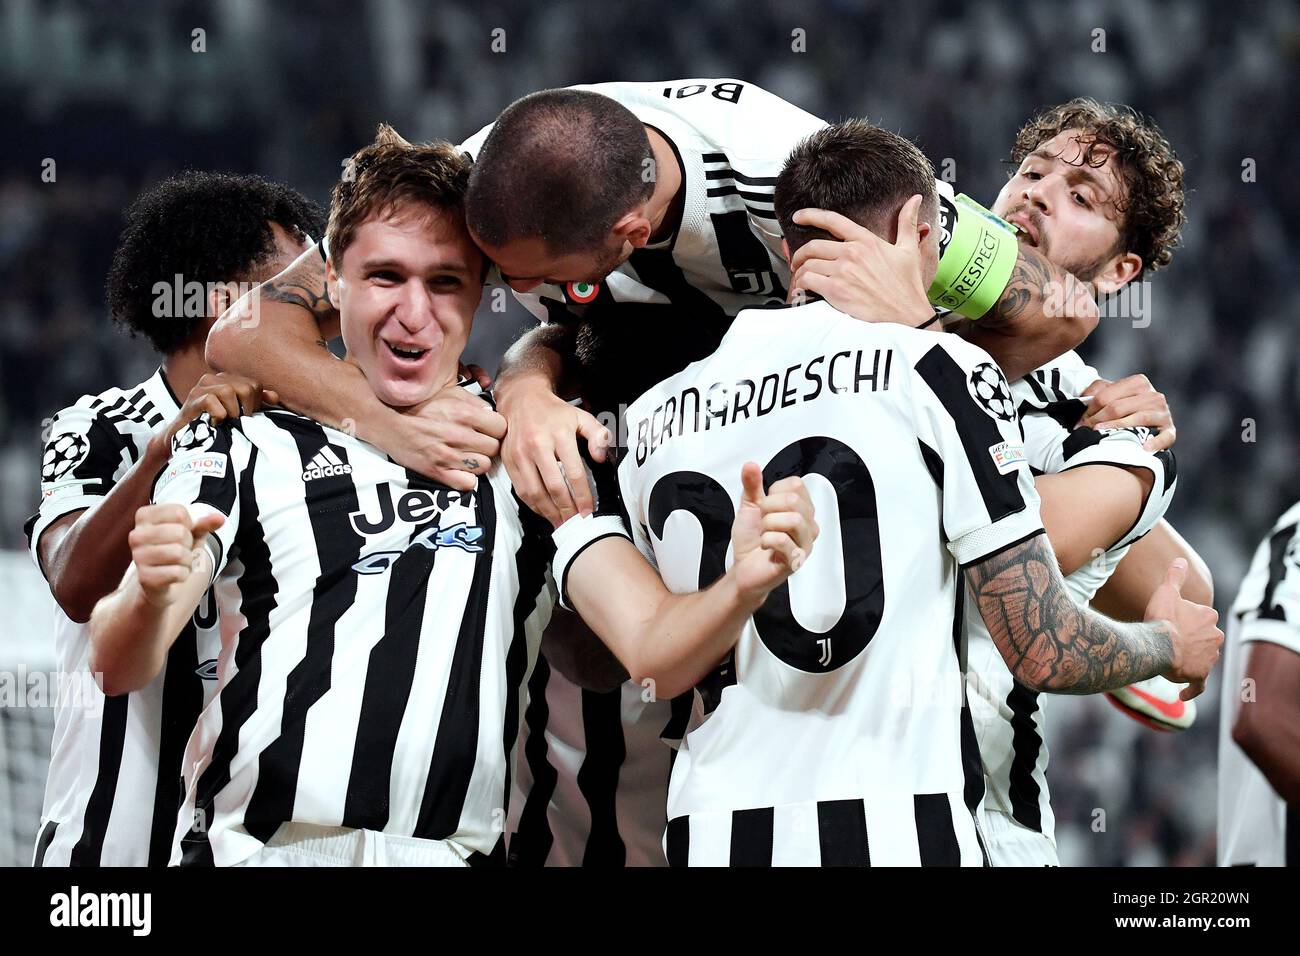 Juventus Team Group High Resolution Stock Photography and Images - Alamy